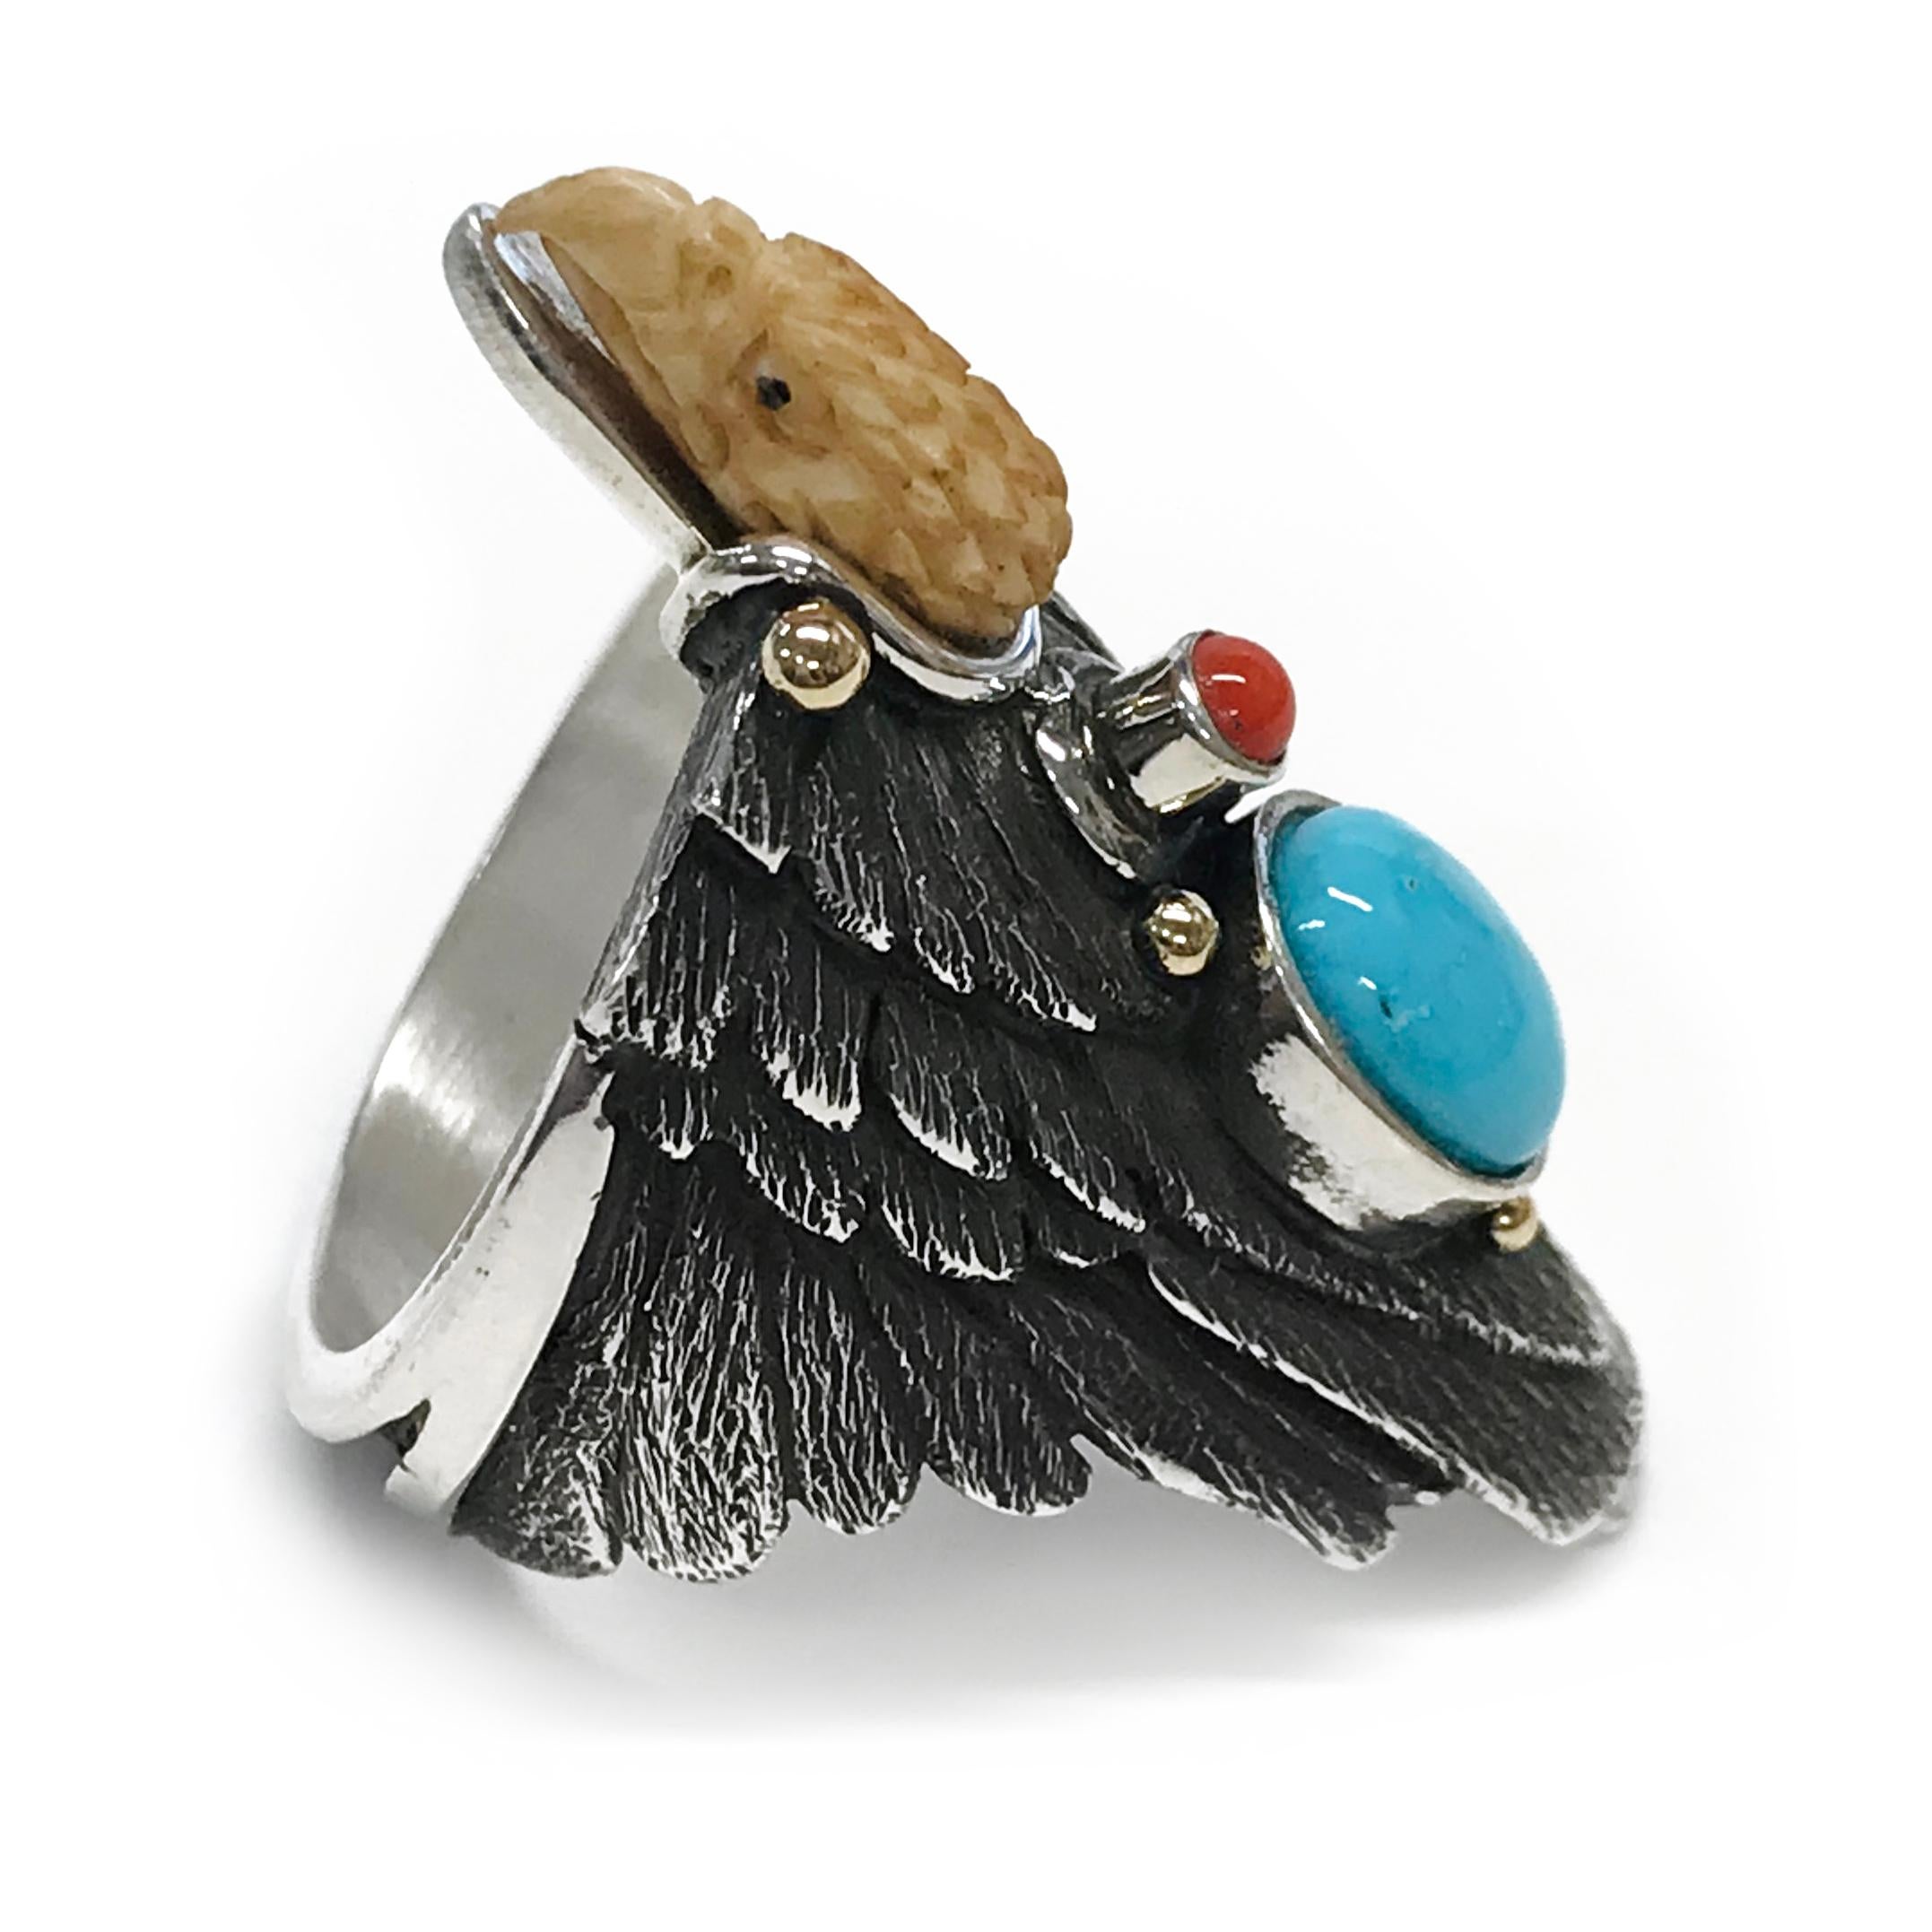 Handcrafted from Sterling Silver with 14k accents by jewelry maker, Ray Winner. This absolutely glorious ring features a natural Kingman Turquoise oval cabochon and Mediterranean Coral round cabochon bezel set. The form of the ring band is created